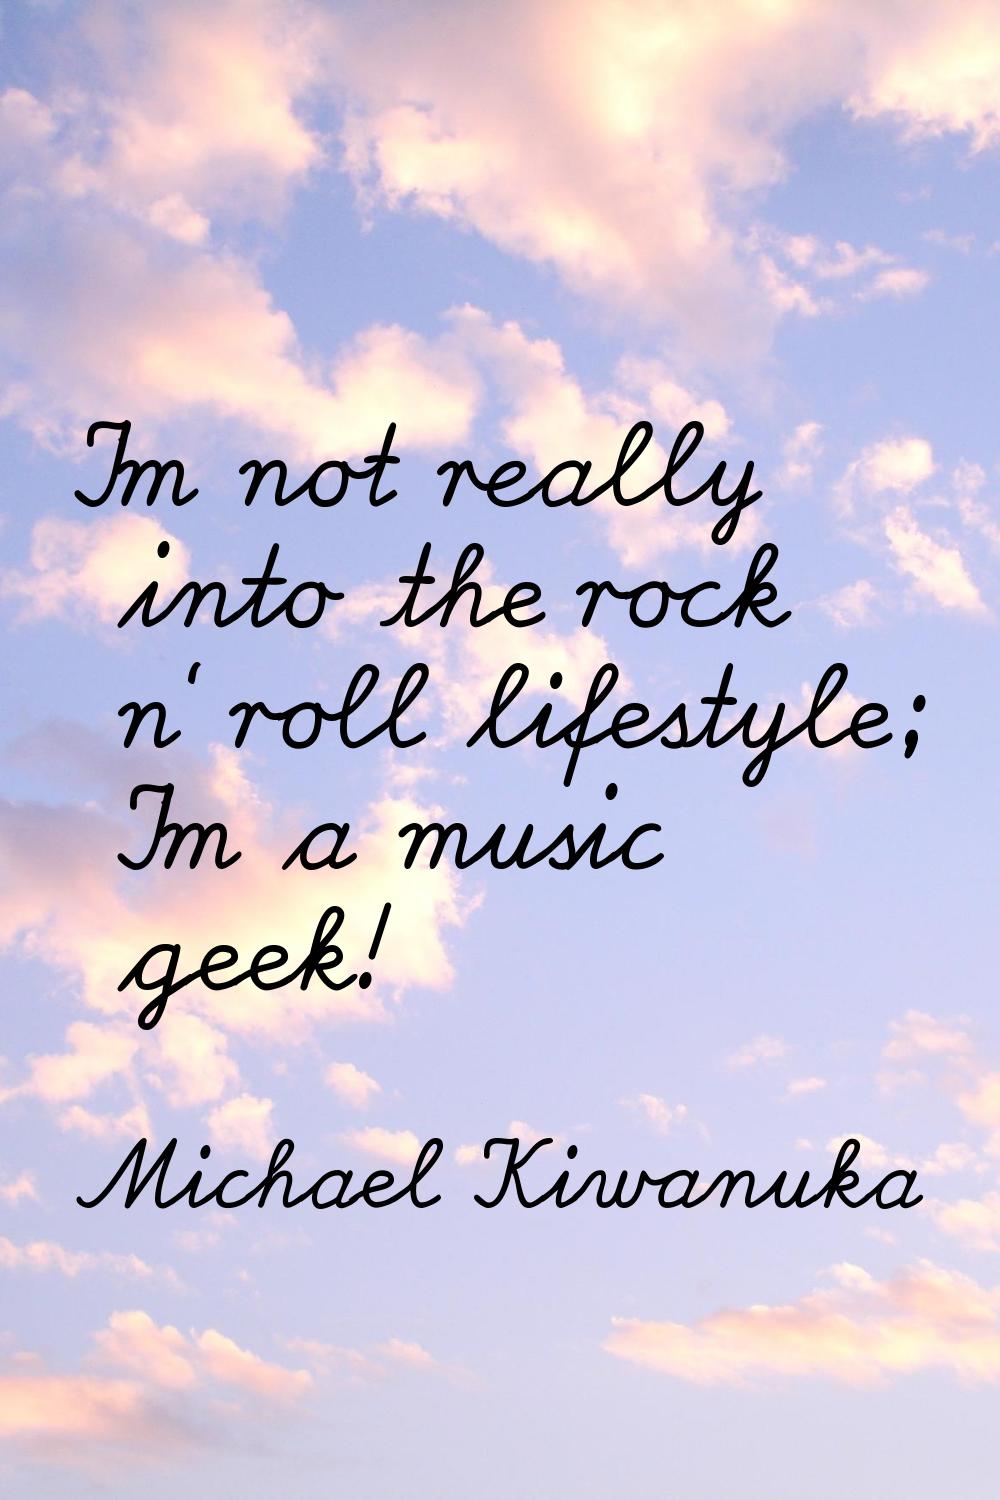 I'm not really into the rock n' roll lifestyle; I'm a music geek!